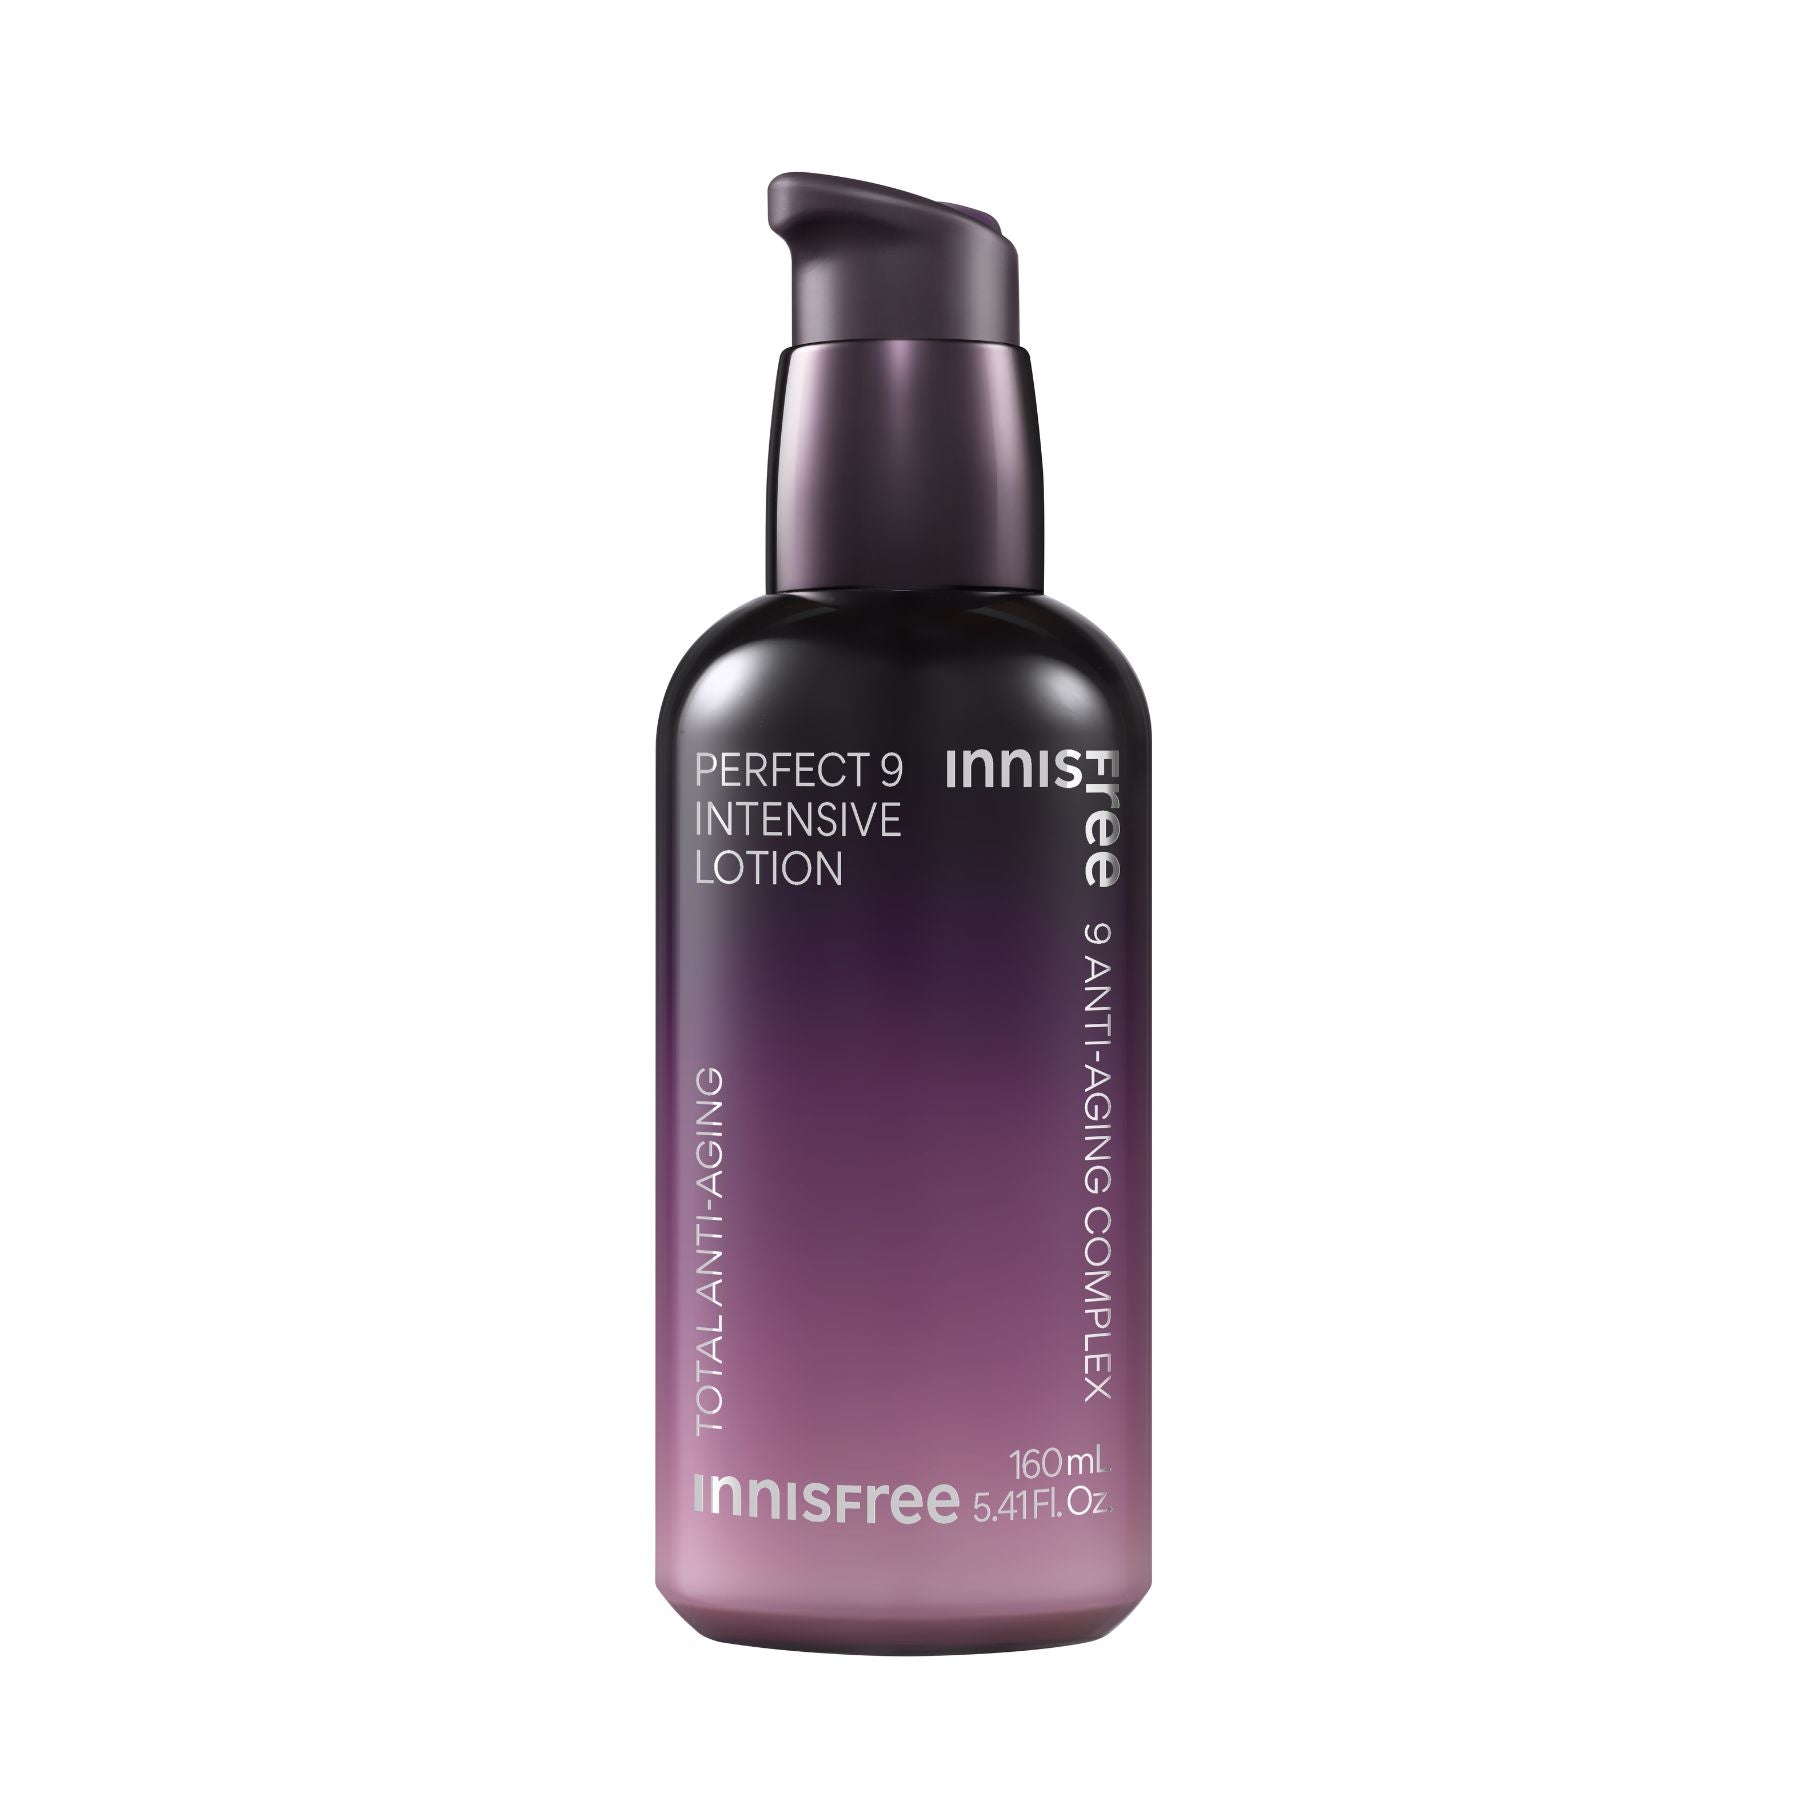 Perfect 9 Intensive Lotion 160ml